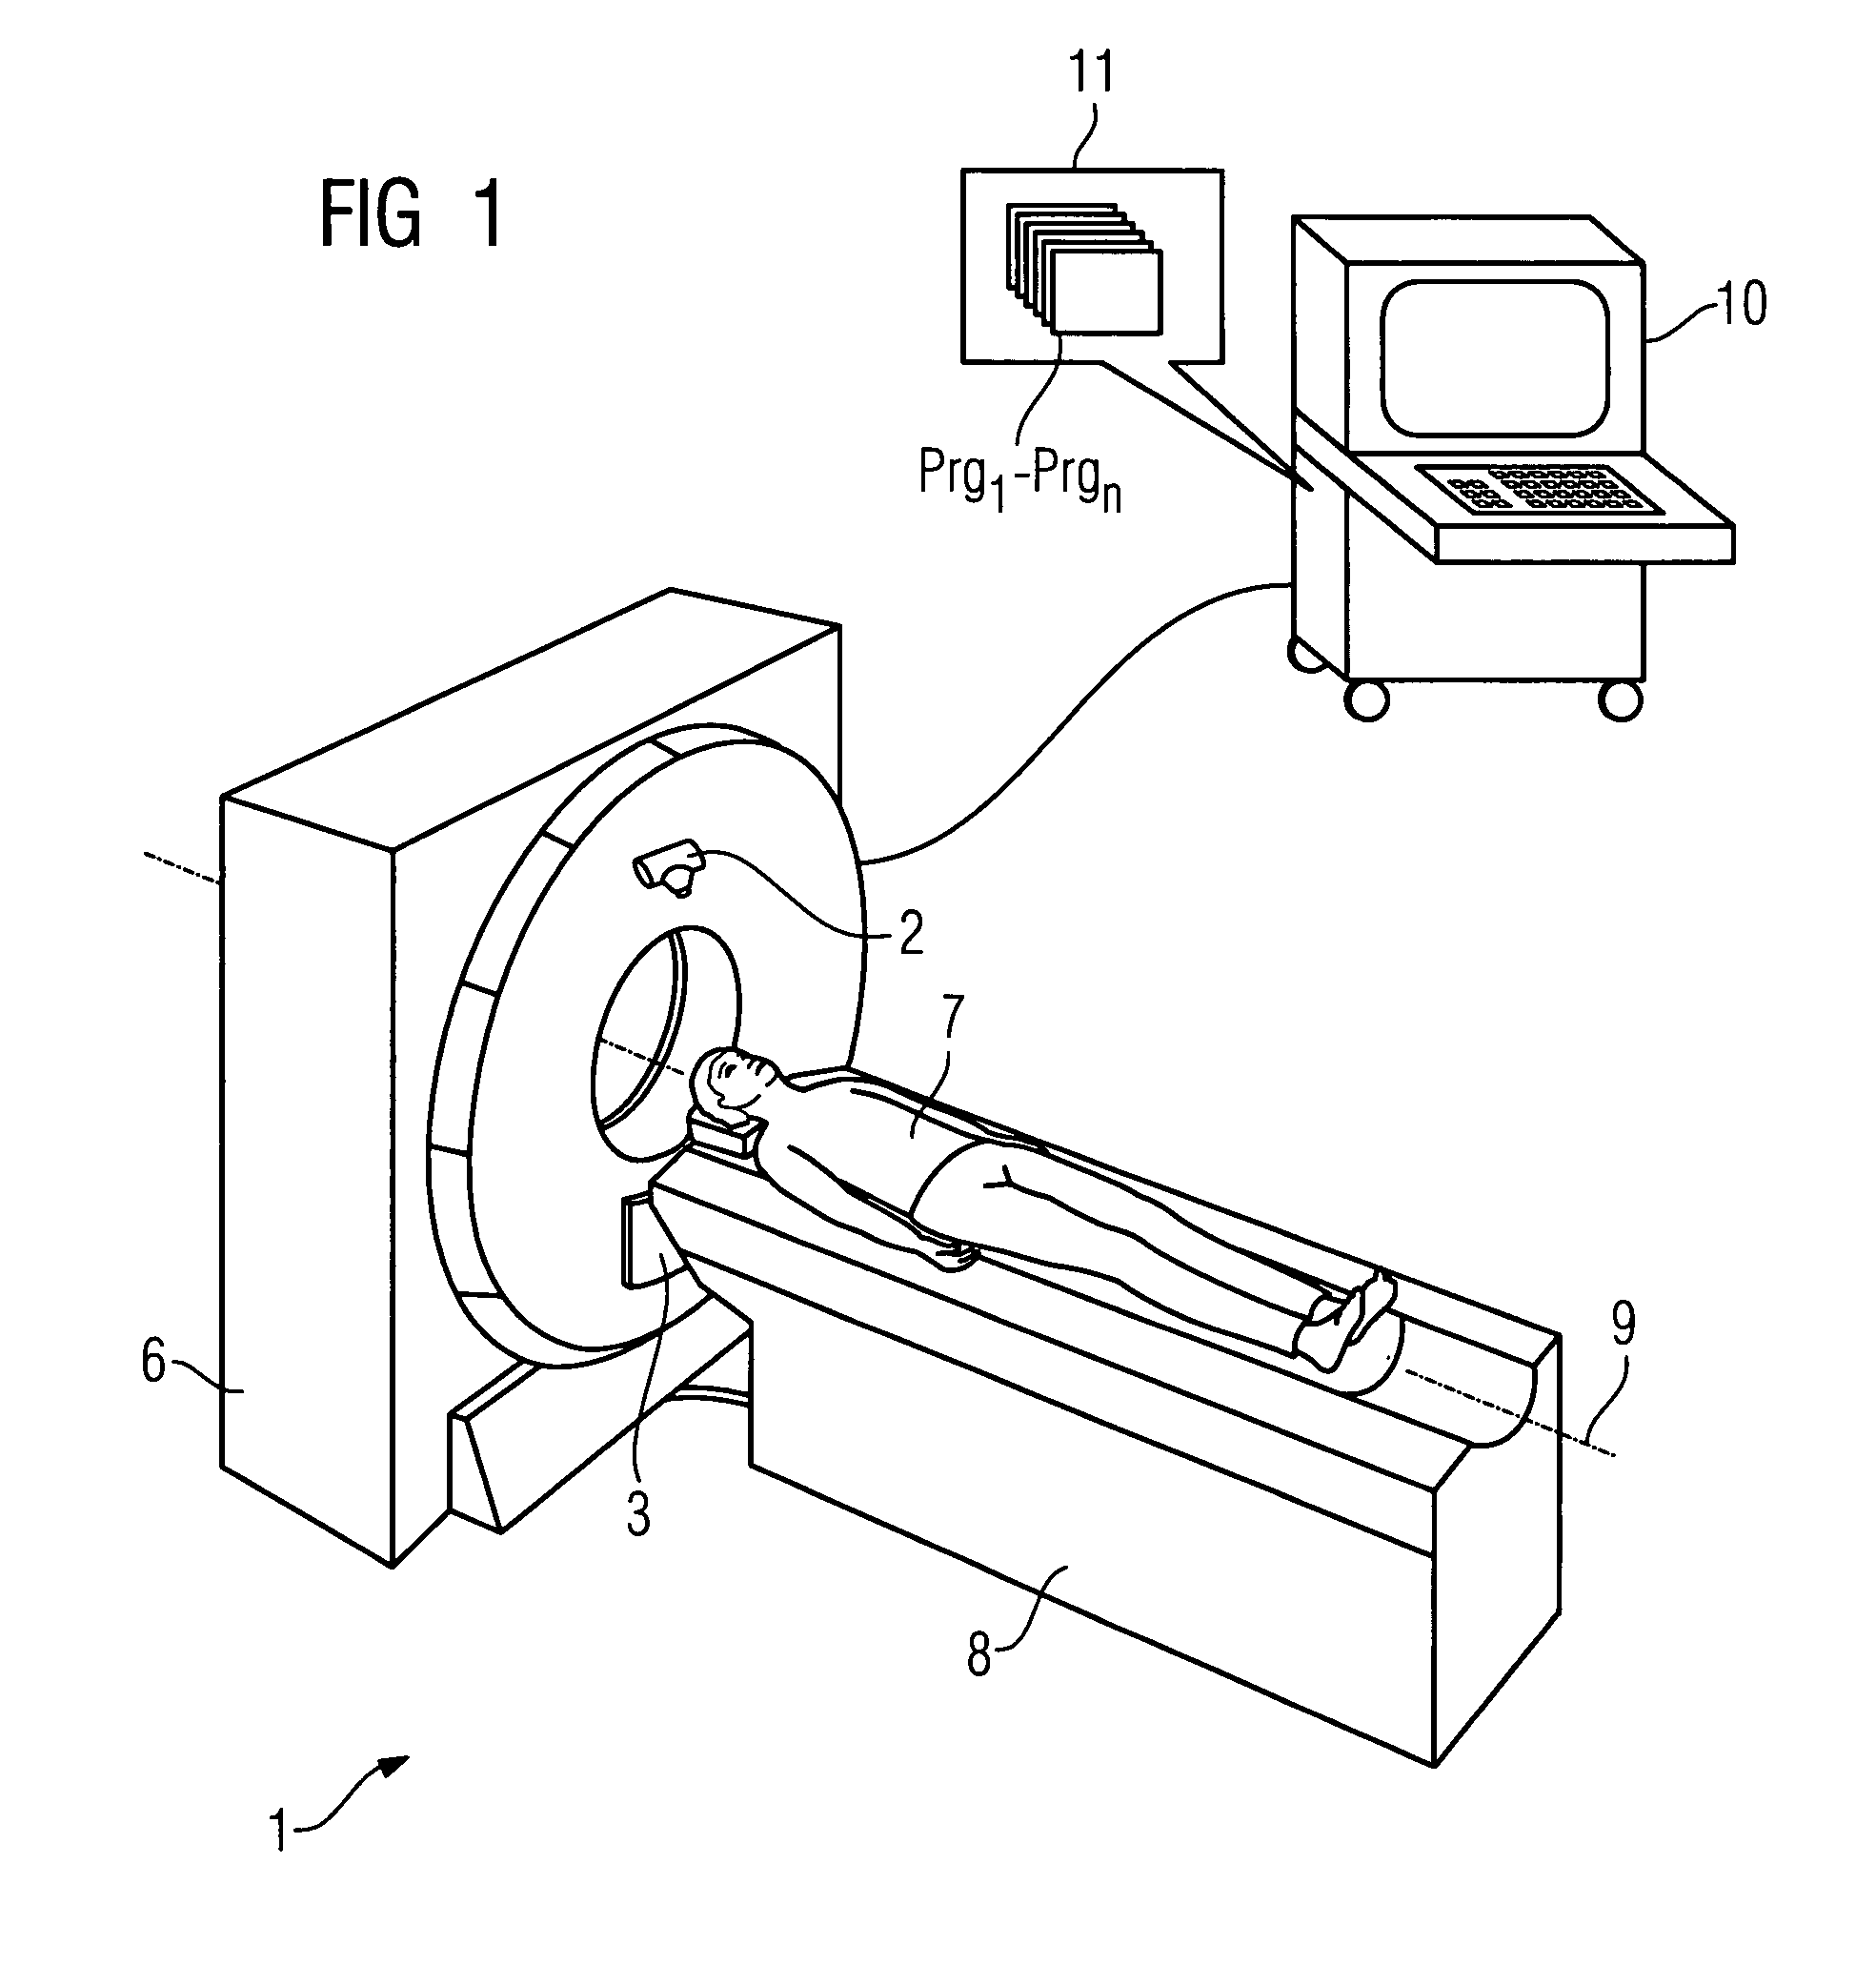 Method for combined bone hardening and scattered radiation correction in X-ray computed tomography